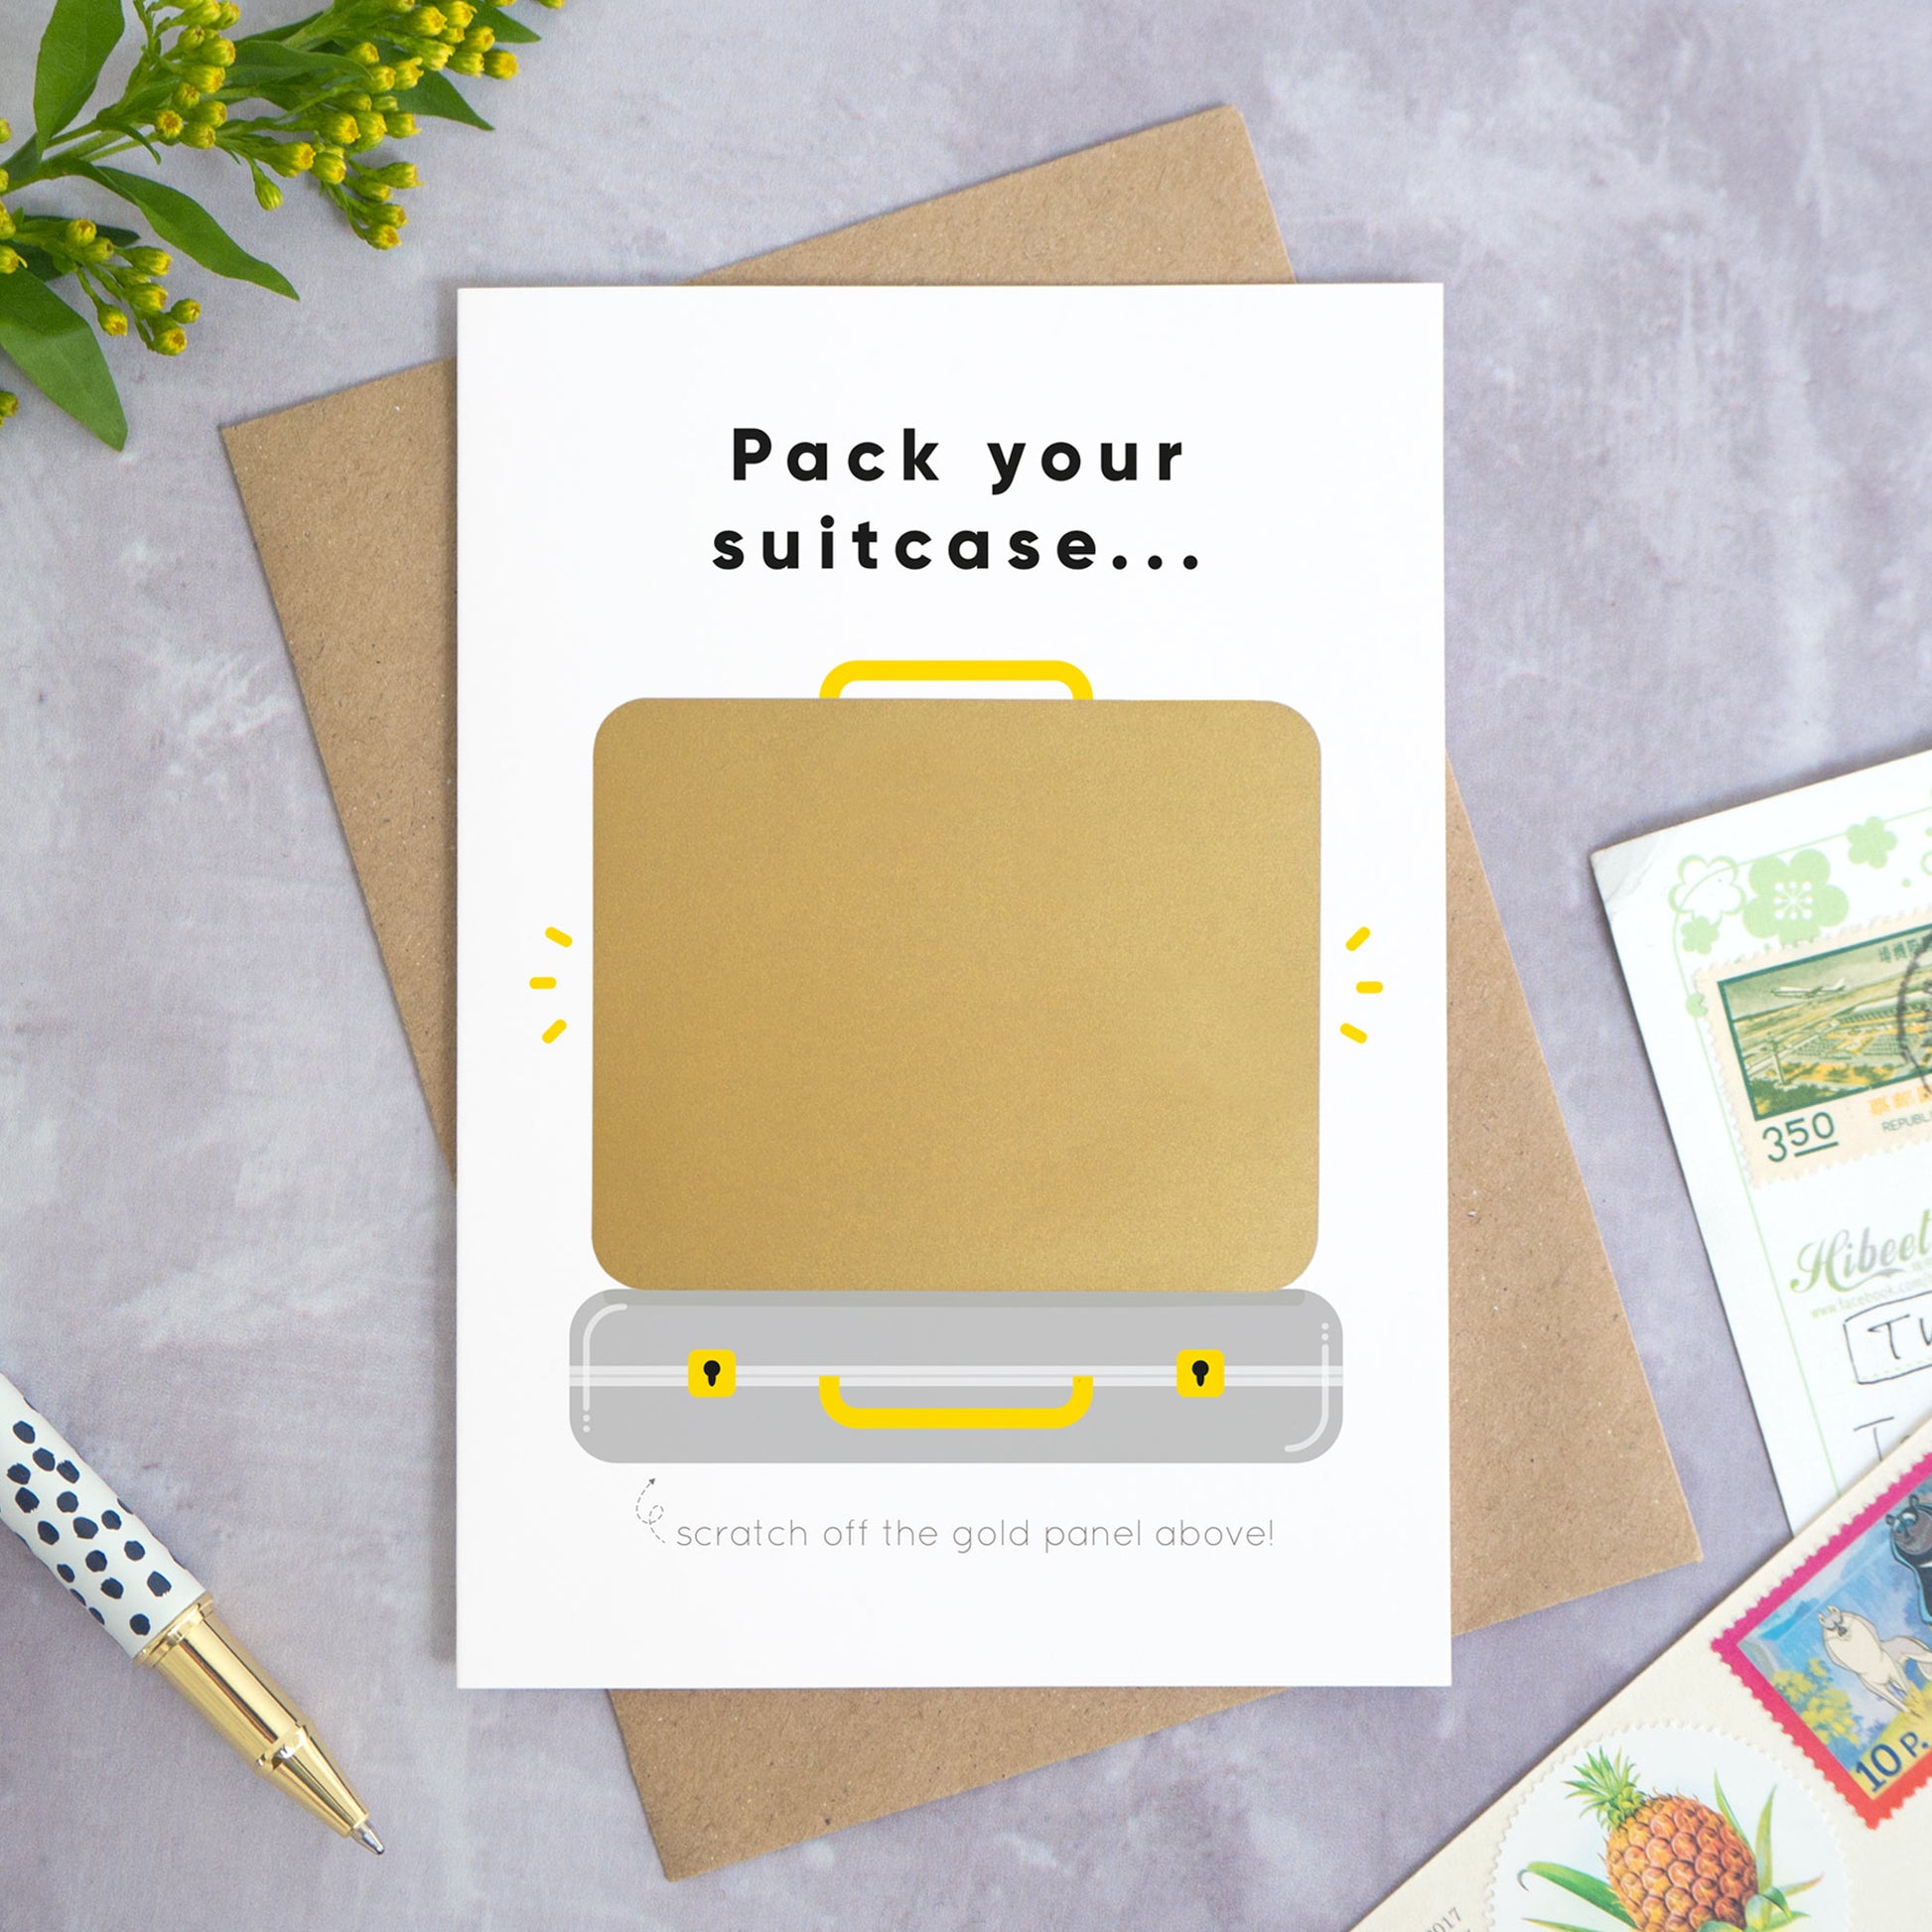 A personalised suitcase travel plans reveal scratch card shot on a grey concrete surface surrounded by greenery, a pen and post cards. The card is the grey version and shows how the card will arrive with the gold panel attached.